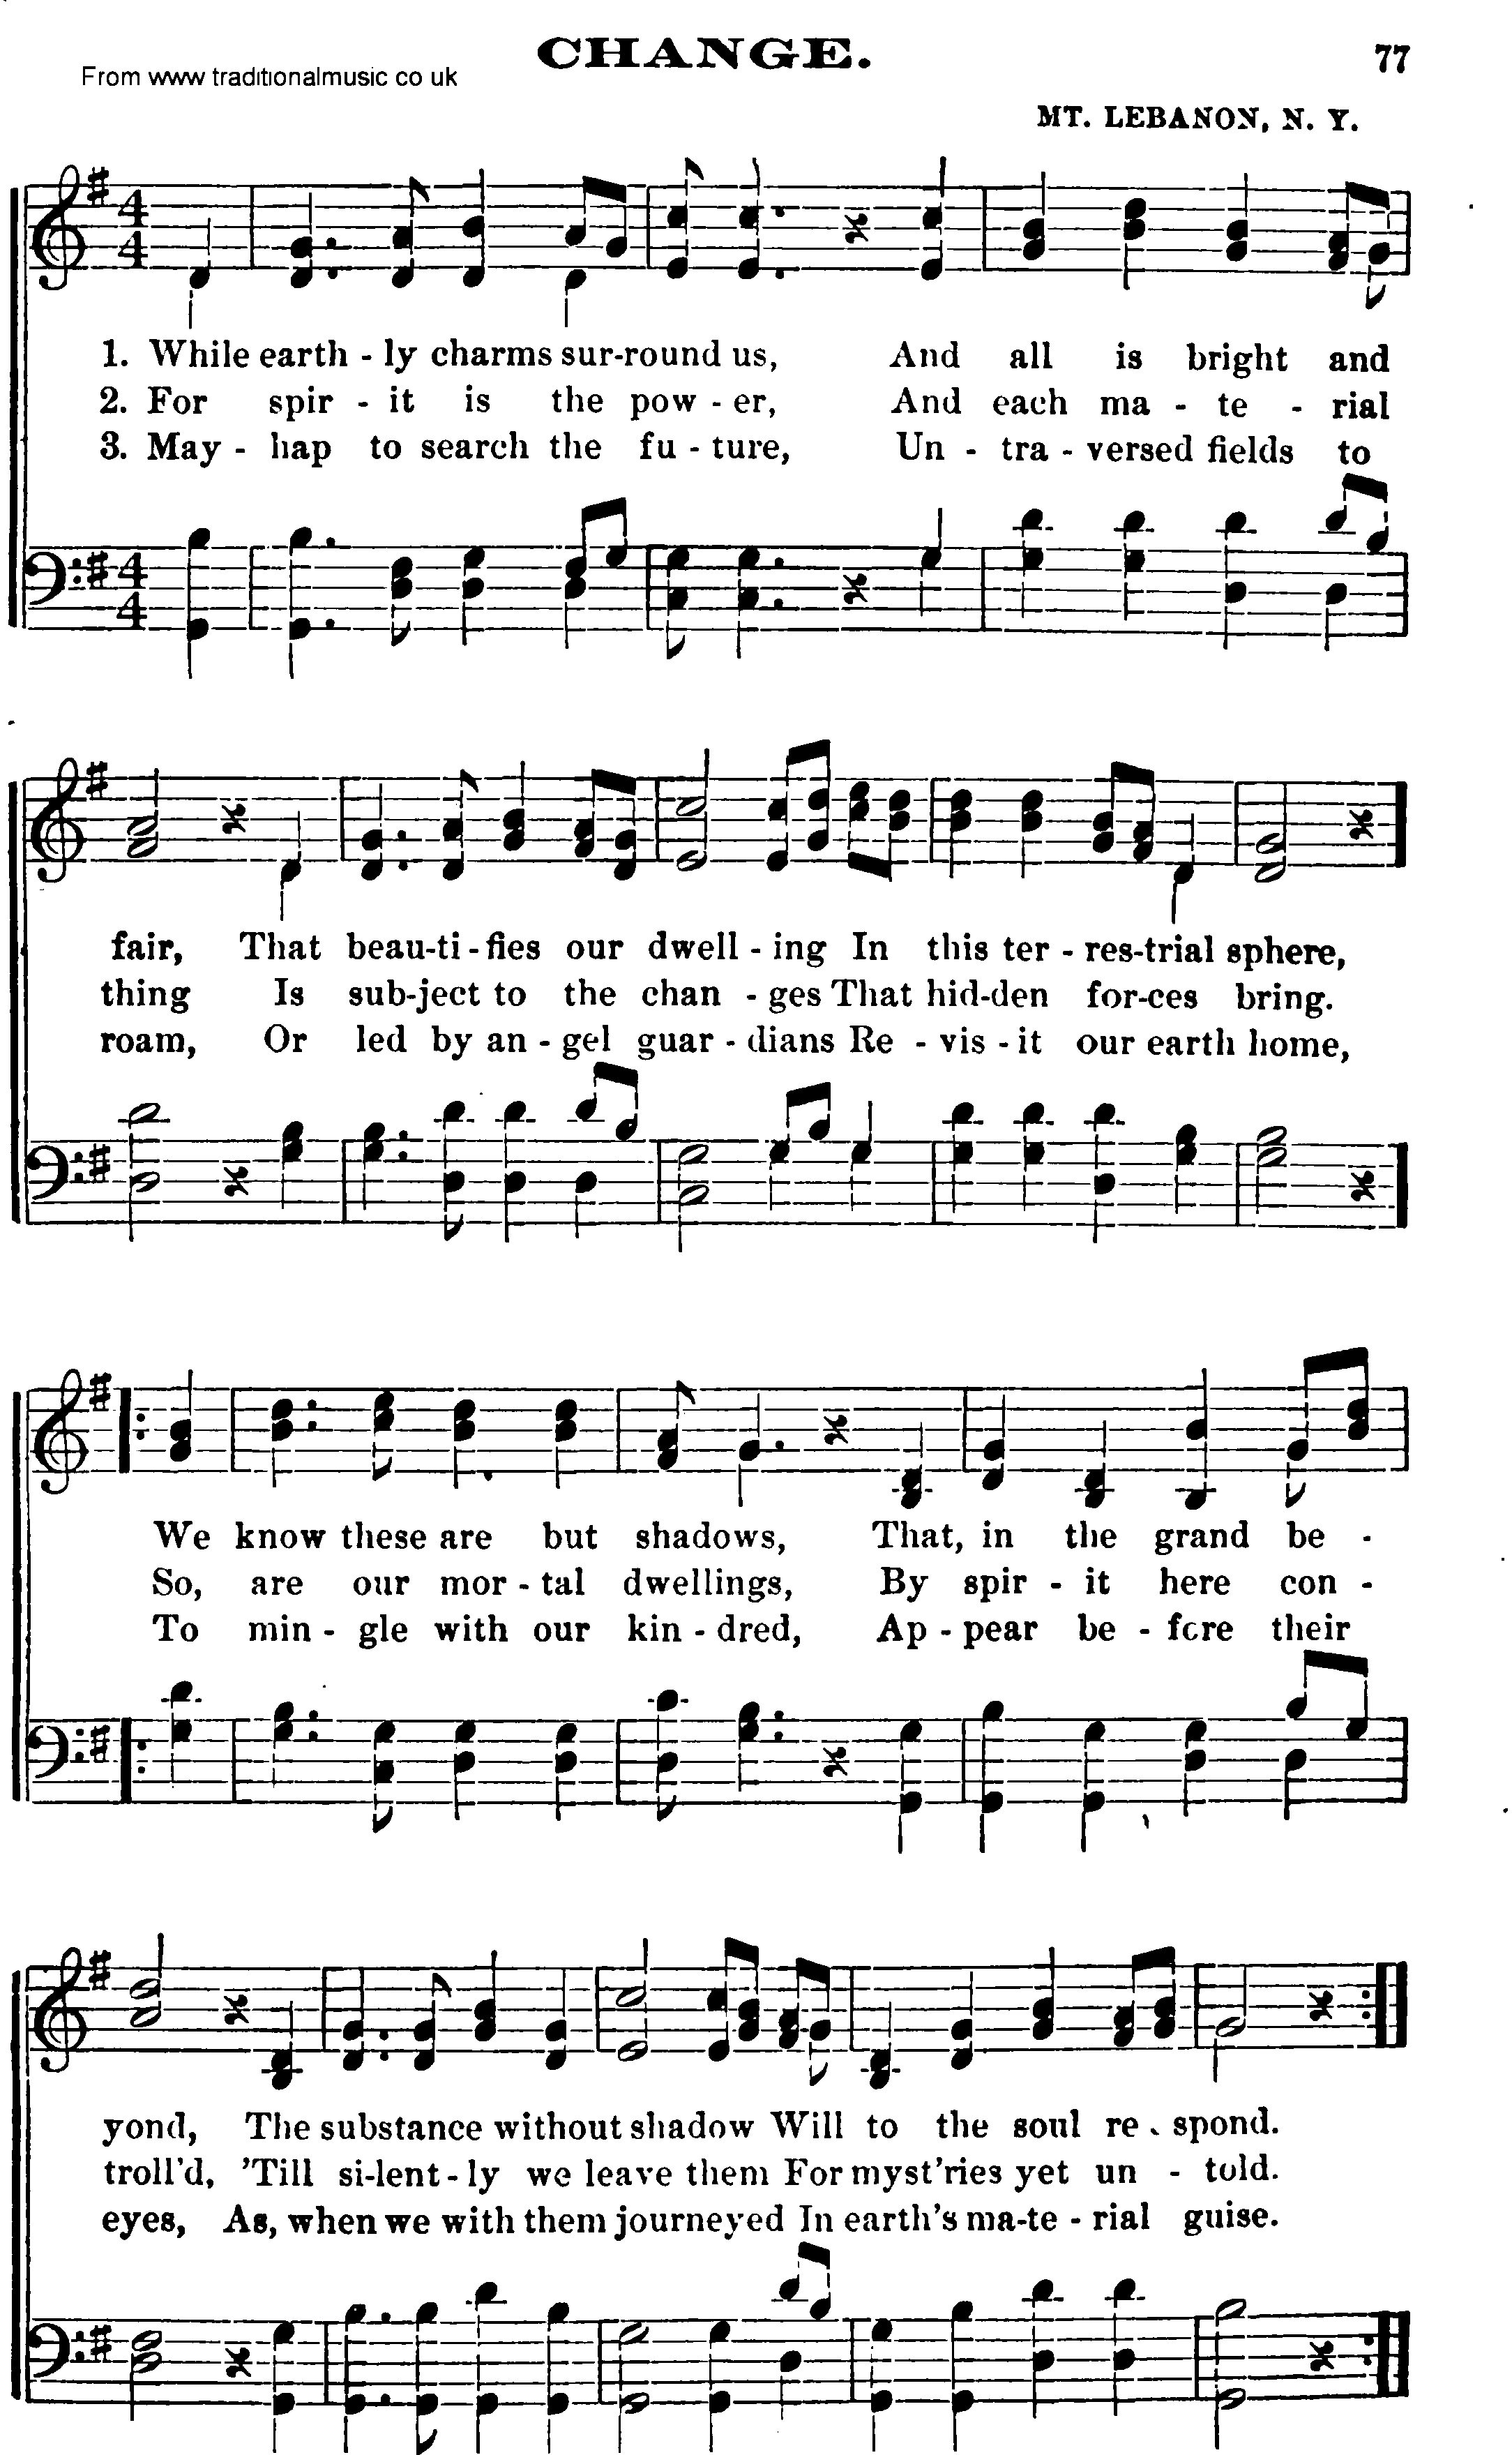 Shaker Music collection, Hymn: Change, sheetmusic and PDF